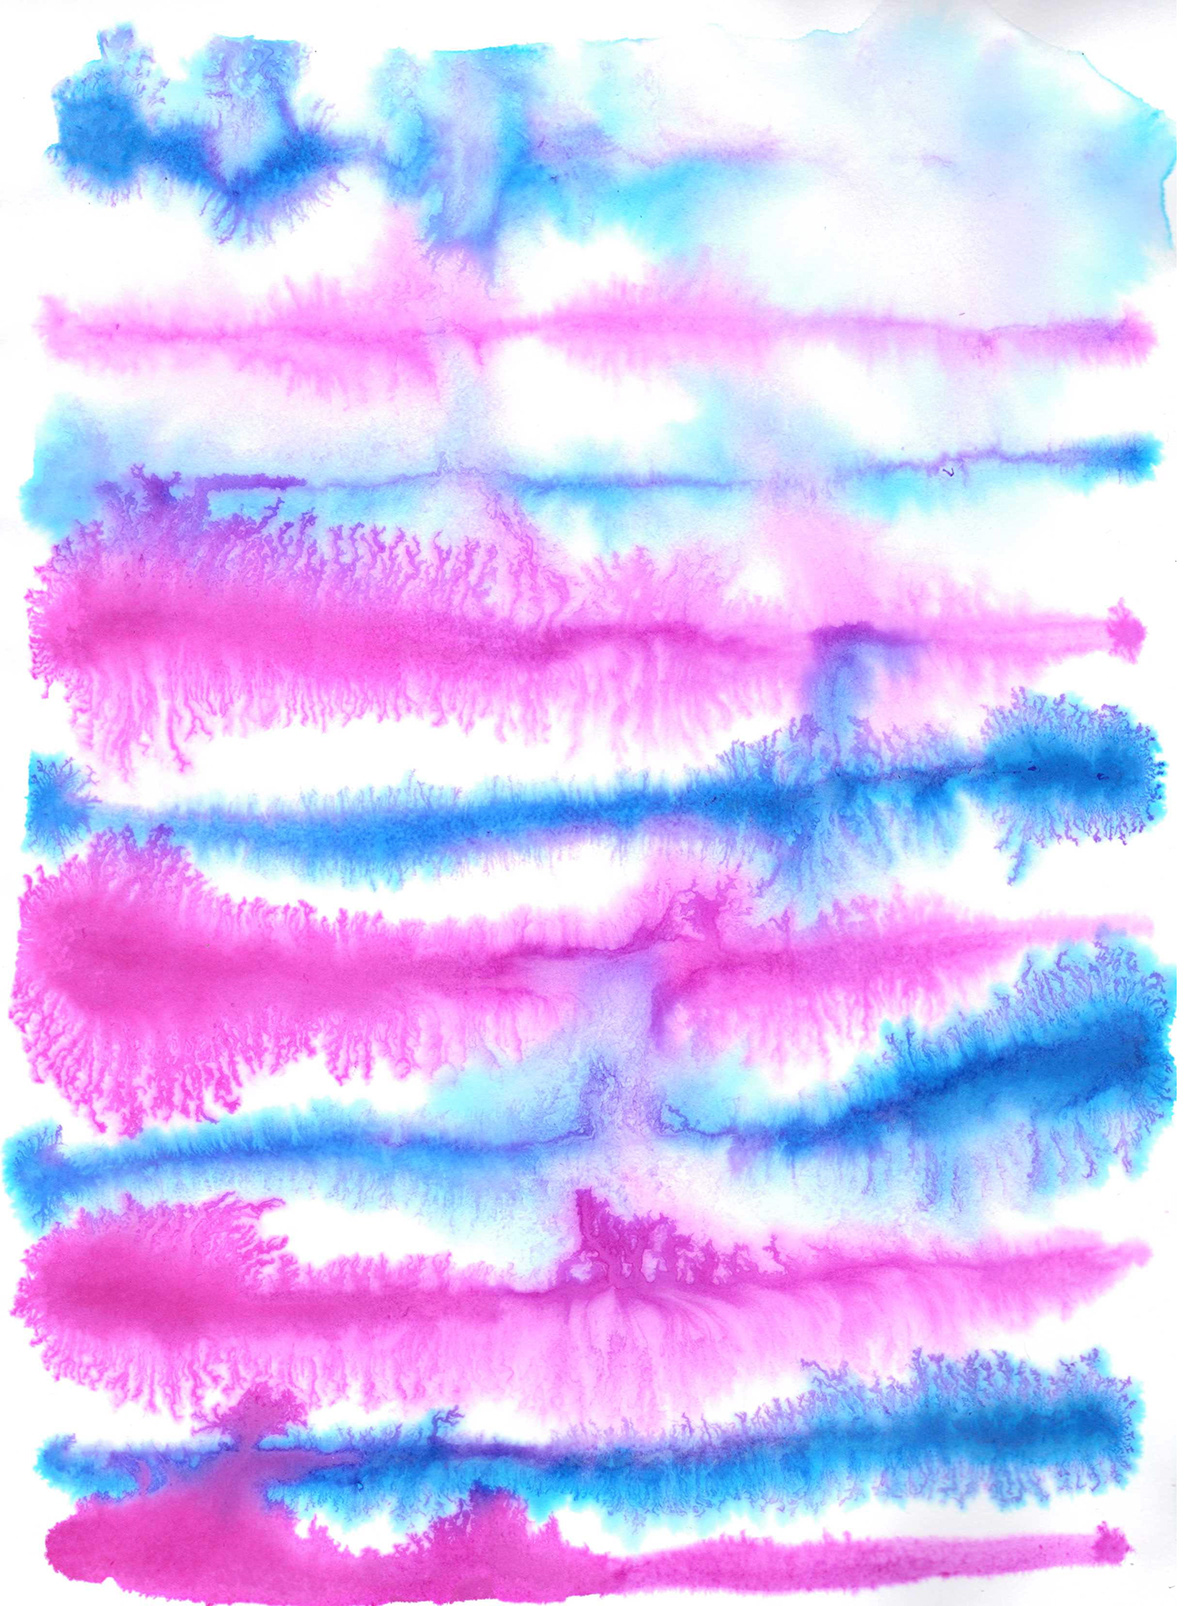 mark making marks print colour brush strokes inks water colour art experiment photoshop